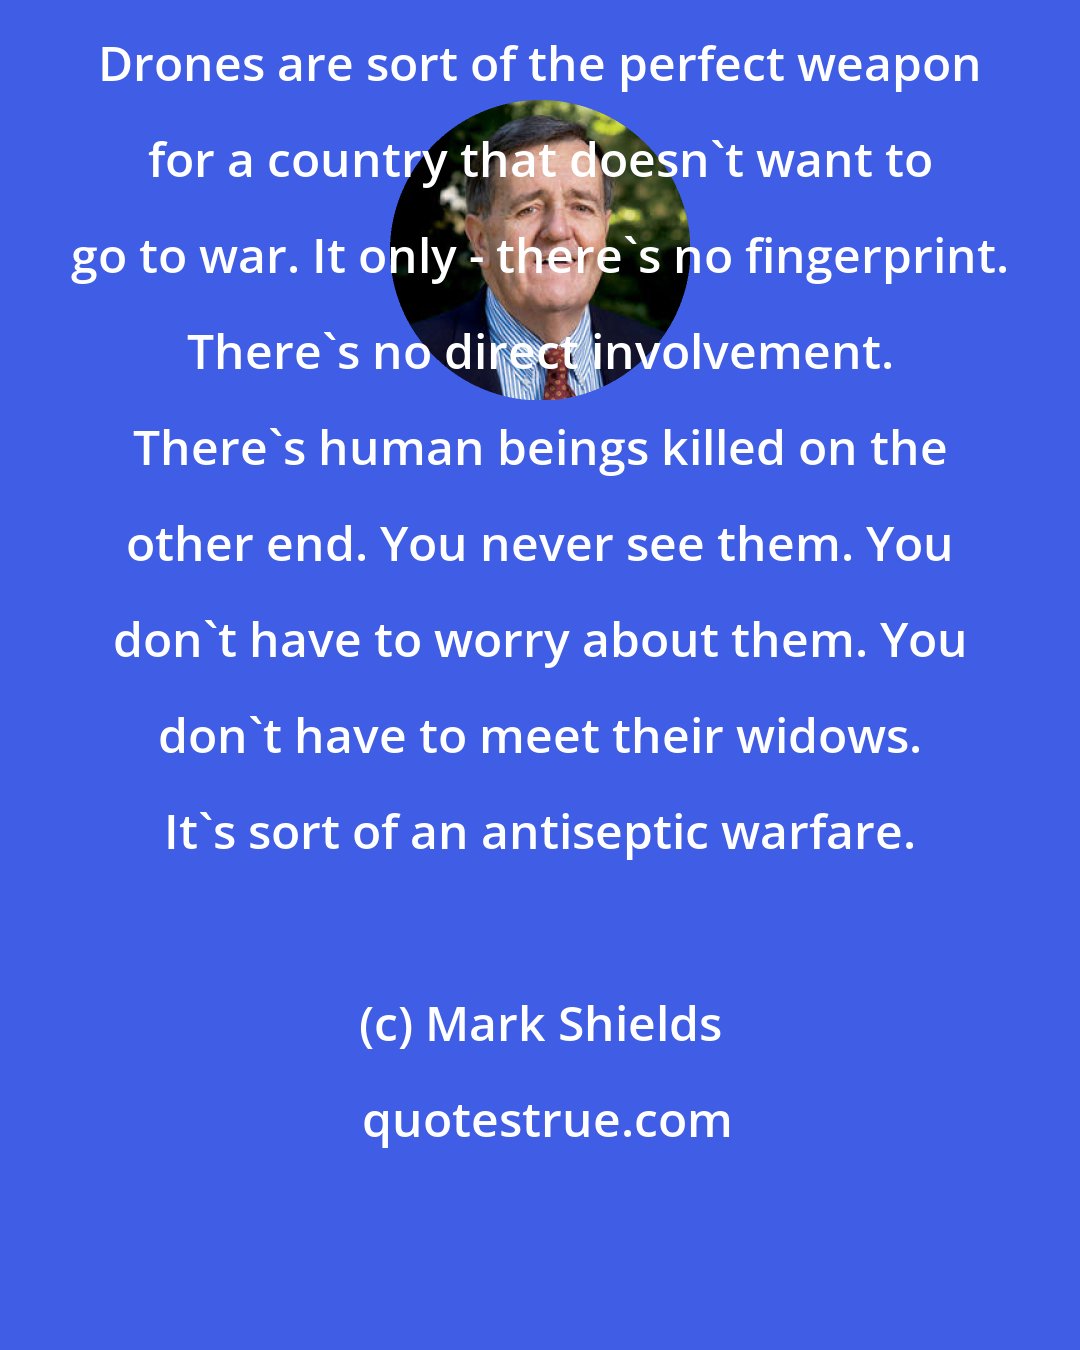 Mark Shields: Drones are sort of the perfect weapon for a country that doesn't want to go to war. It only - there's no fingerprint. There's no direct involvement. There's human beings killed on the other end. You never see them. You don't have to worry about them. You don't have to meet their widows. It's sort of an antiseptic warfare.